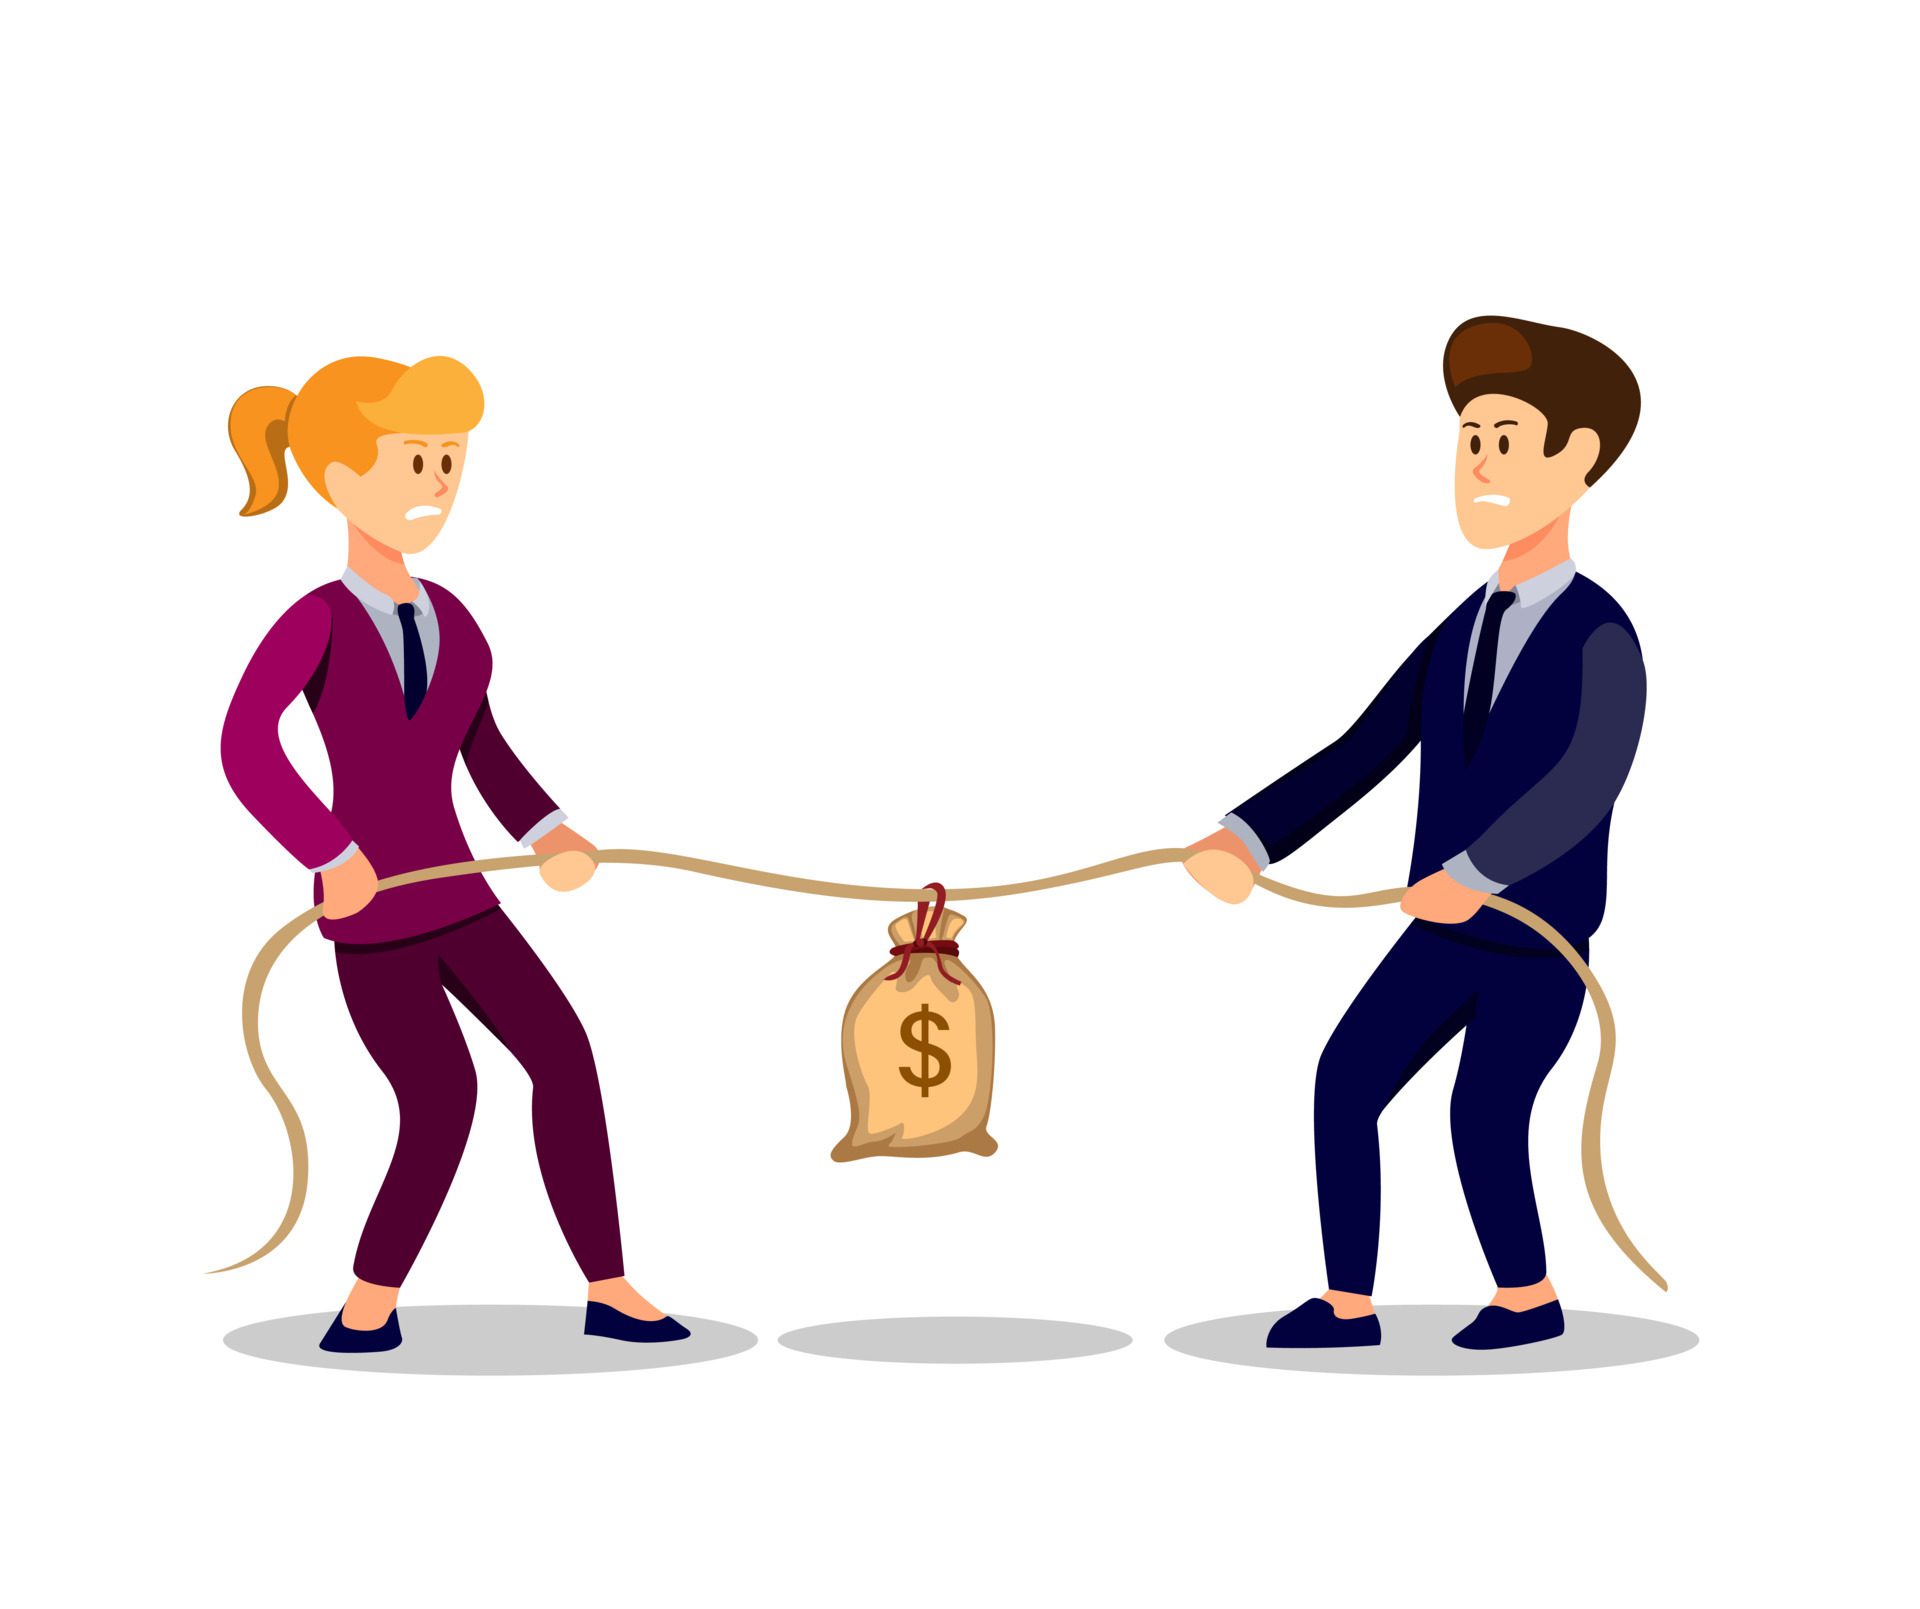 business man and woman pulling rope or tug of war to get money in bag business competition concept in cartoon illustration vector business man and woman pulling rope or tug of war to get money in bag business competition concept in cartoon illustration vector